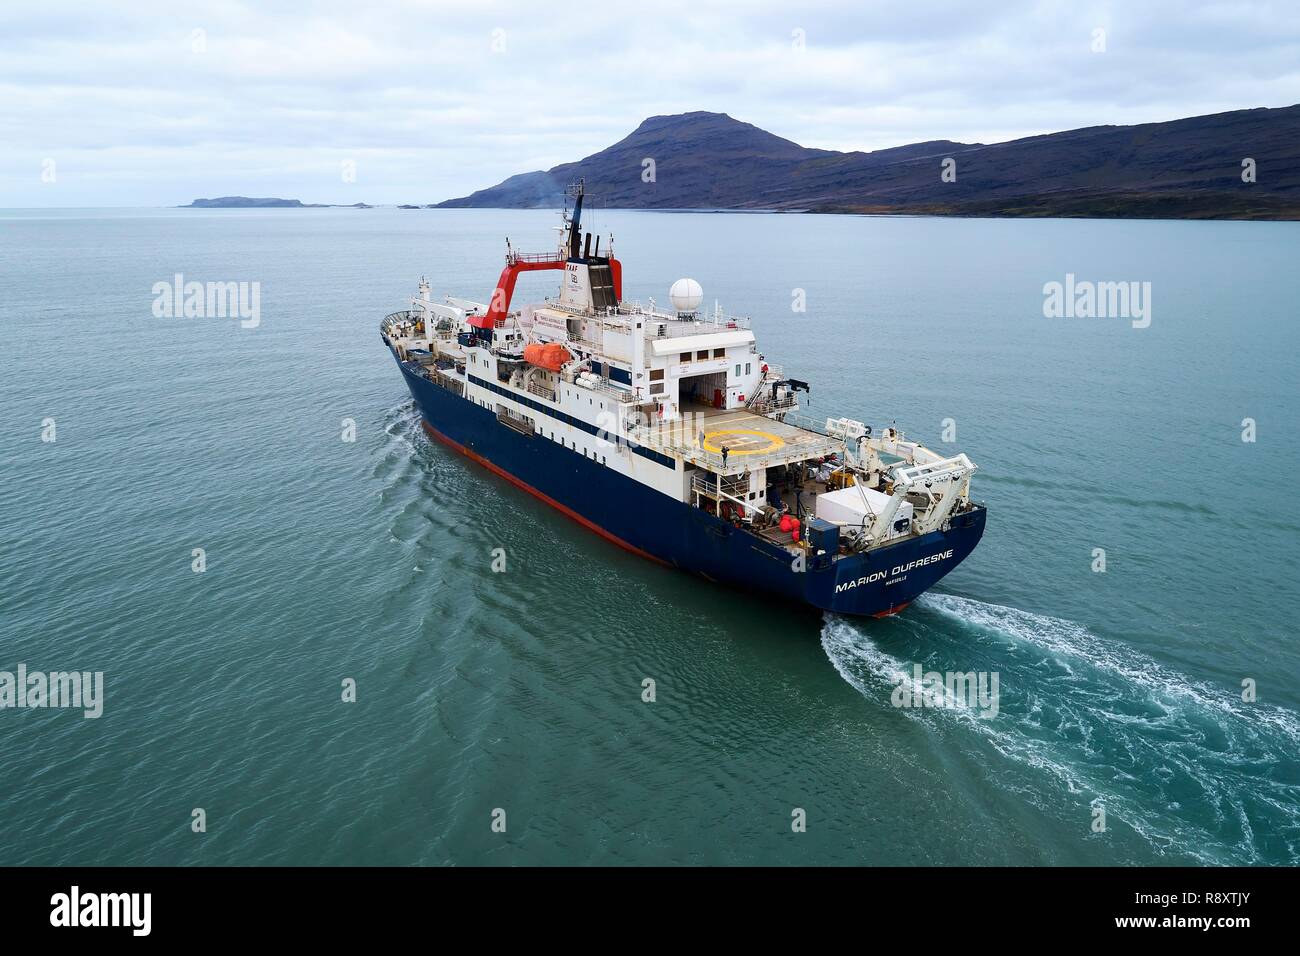 France, Indian Ocean, French Southern and Antarctic Lands, Kerguelen Islands, Rallier du Baty Peninsula, Baie de la Table, the Marion Dufresne (supply ship of French Southern and Antarctic Territories) (aerial view) Stock Photo